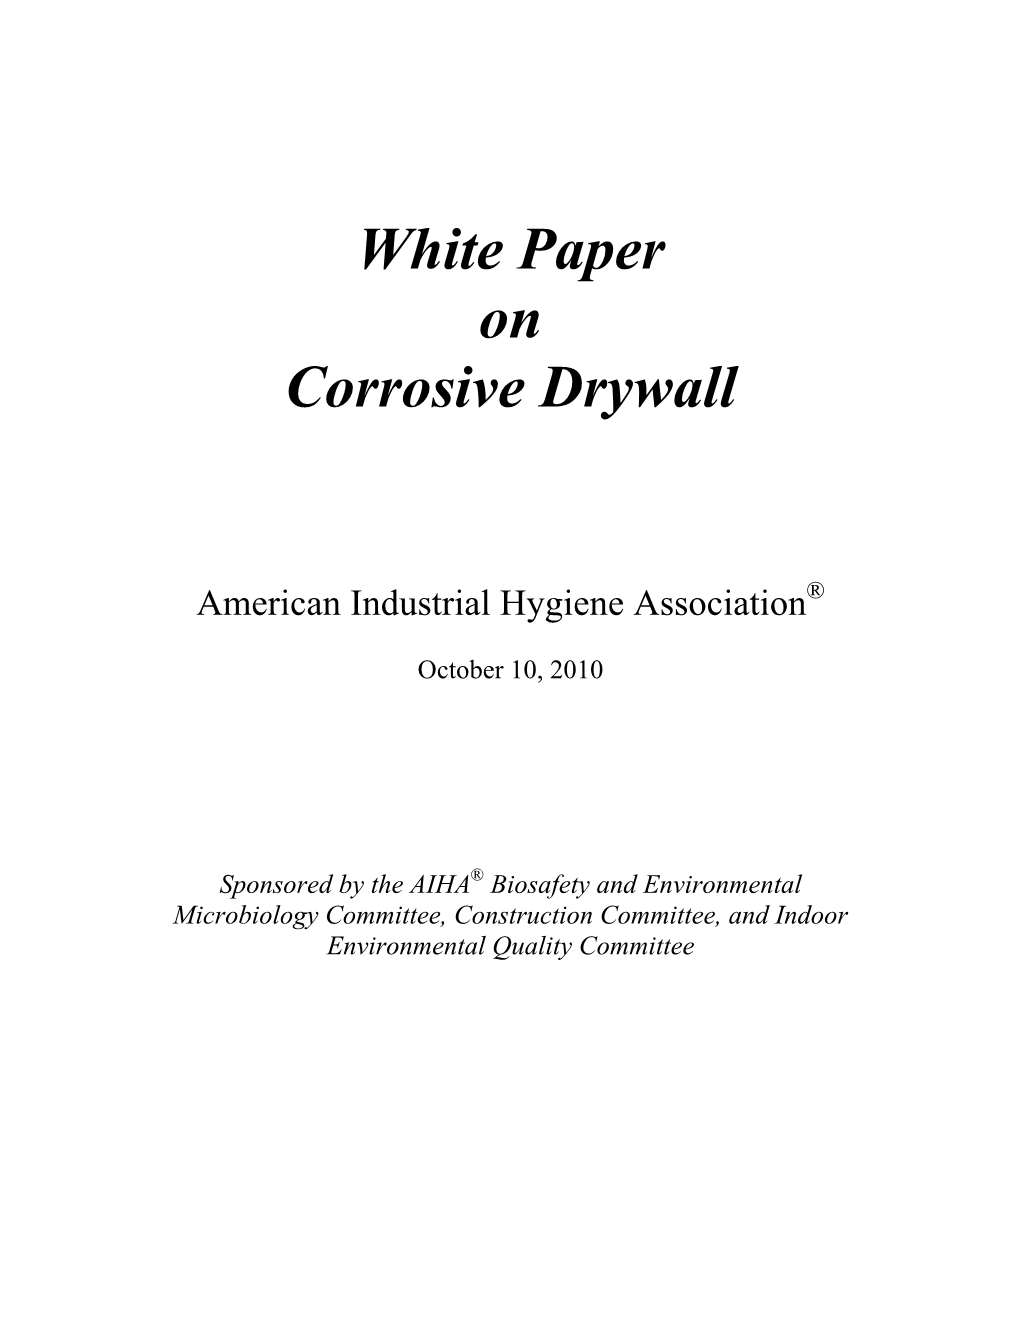 White Paper on Corrosive Drywall